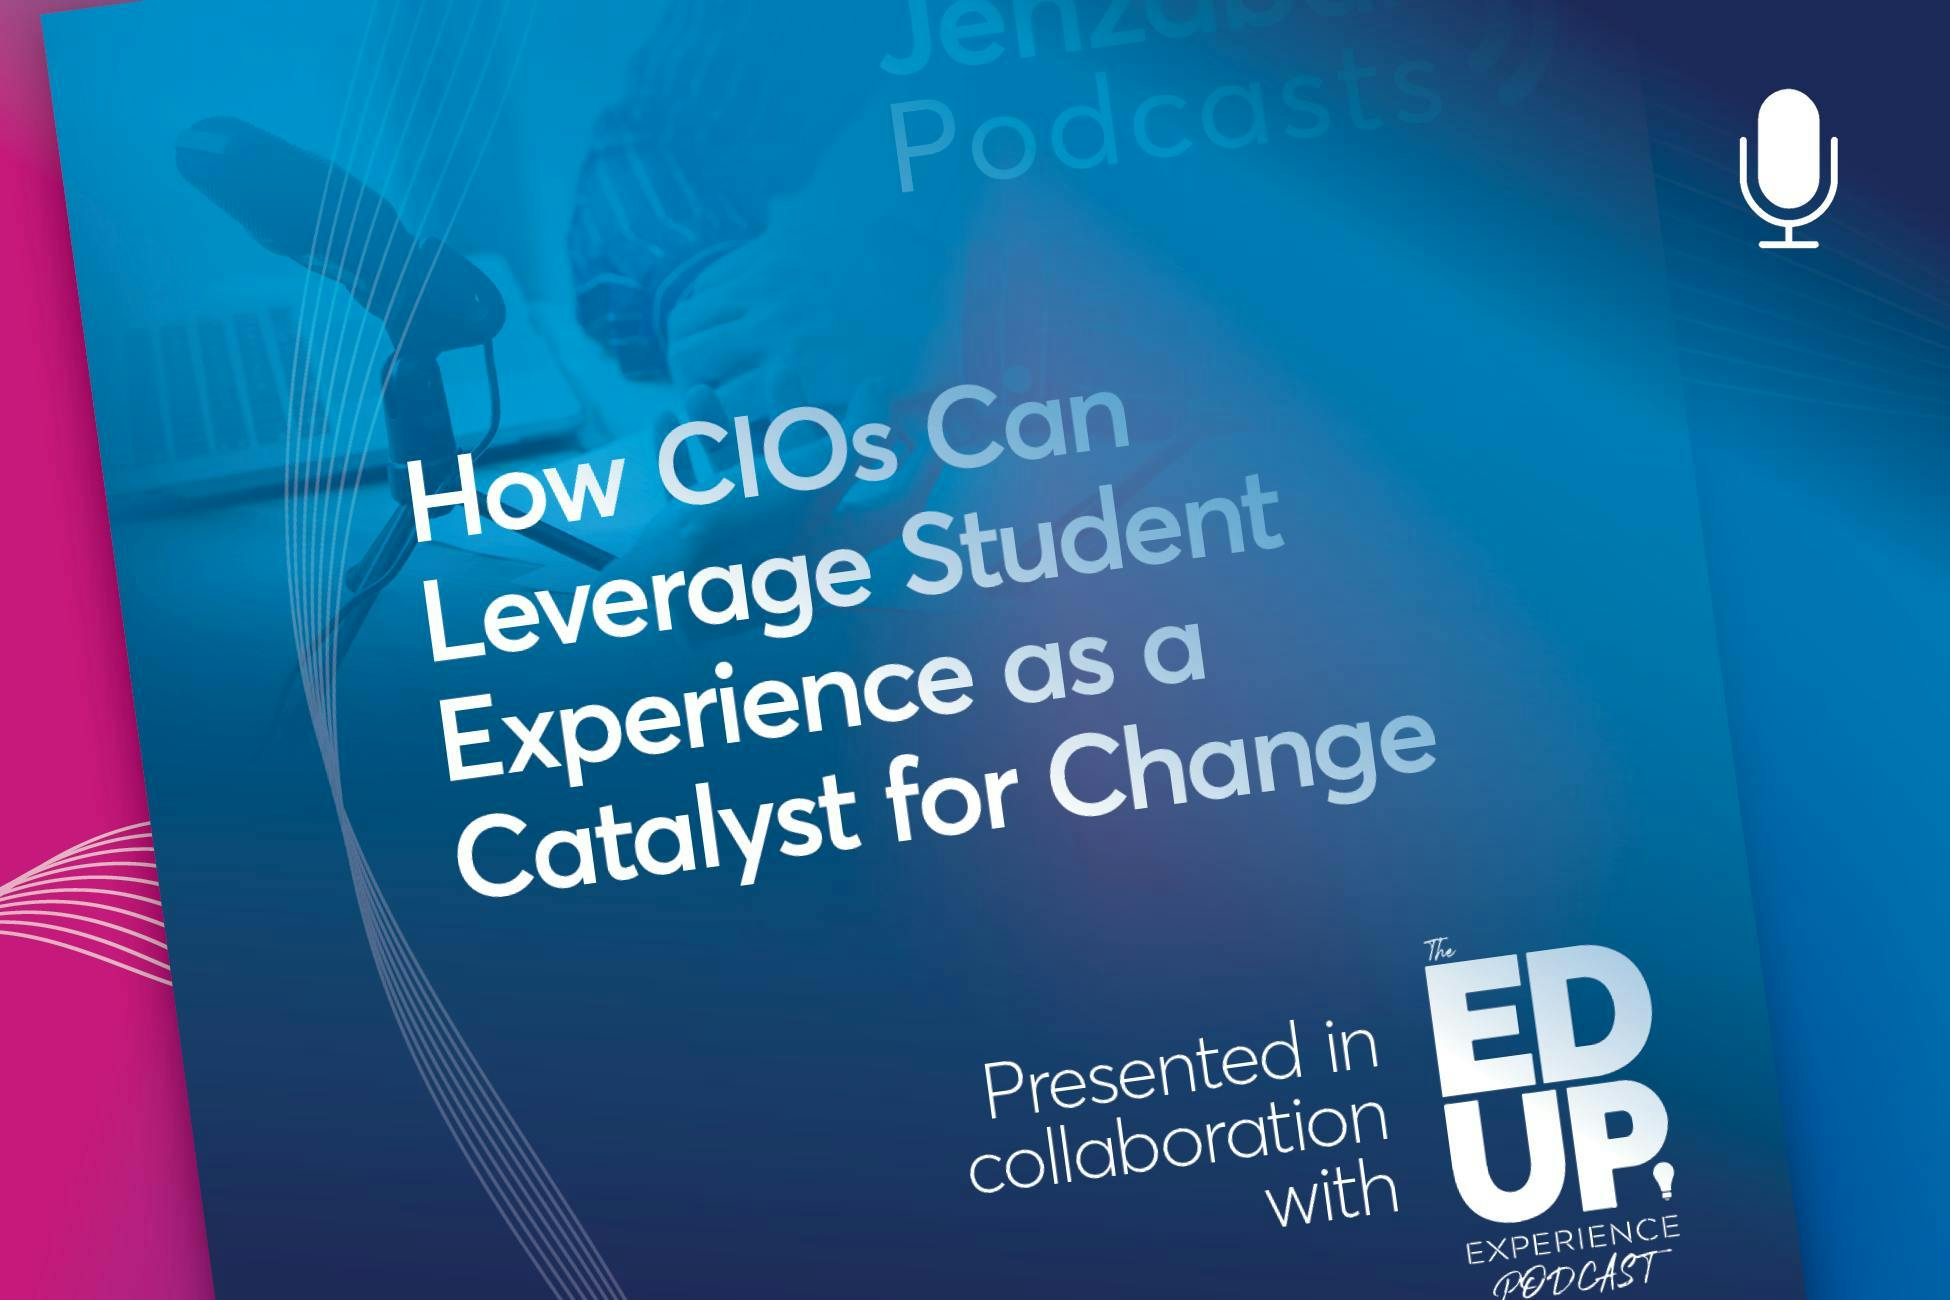 Podcast: How CIOs Can Leverage Student Experience as a Catalyst Change